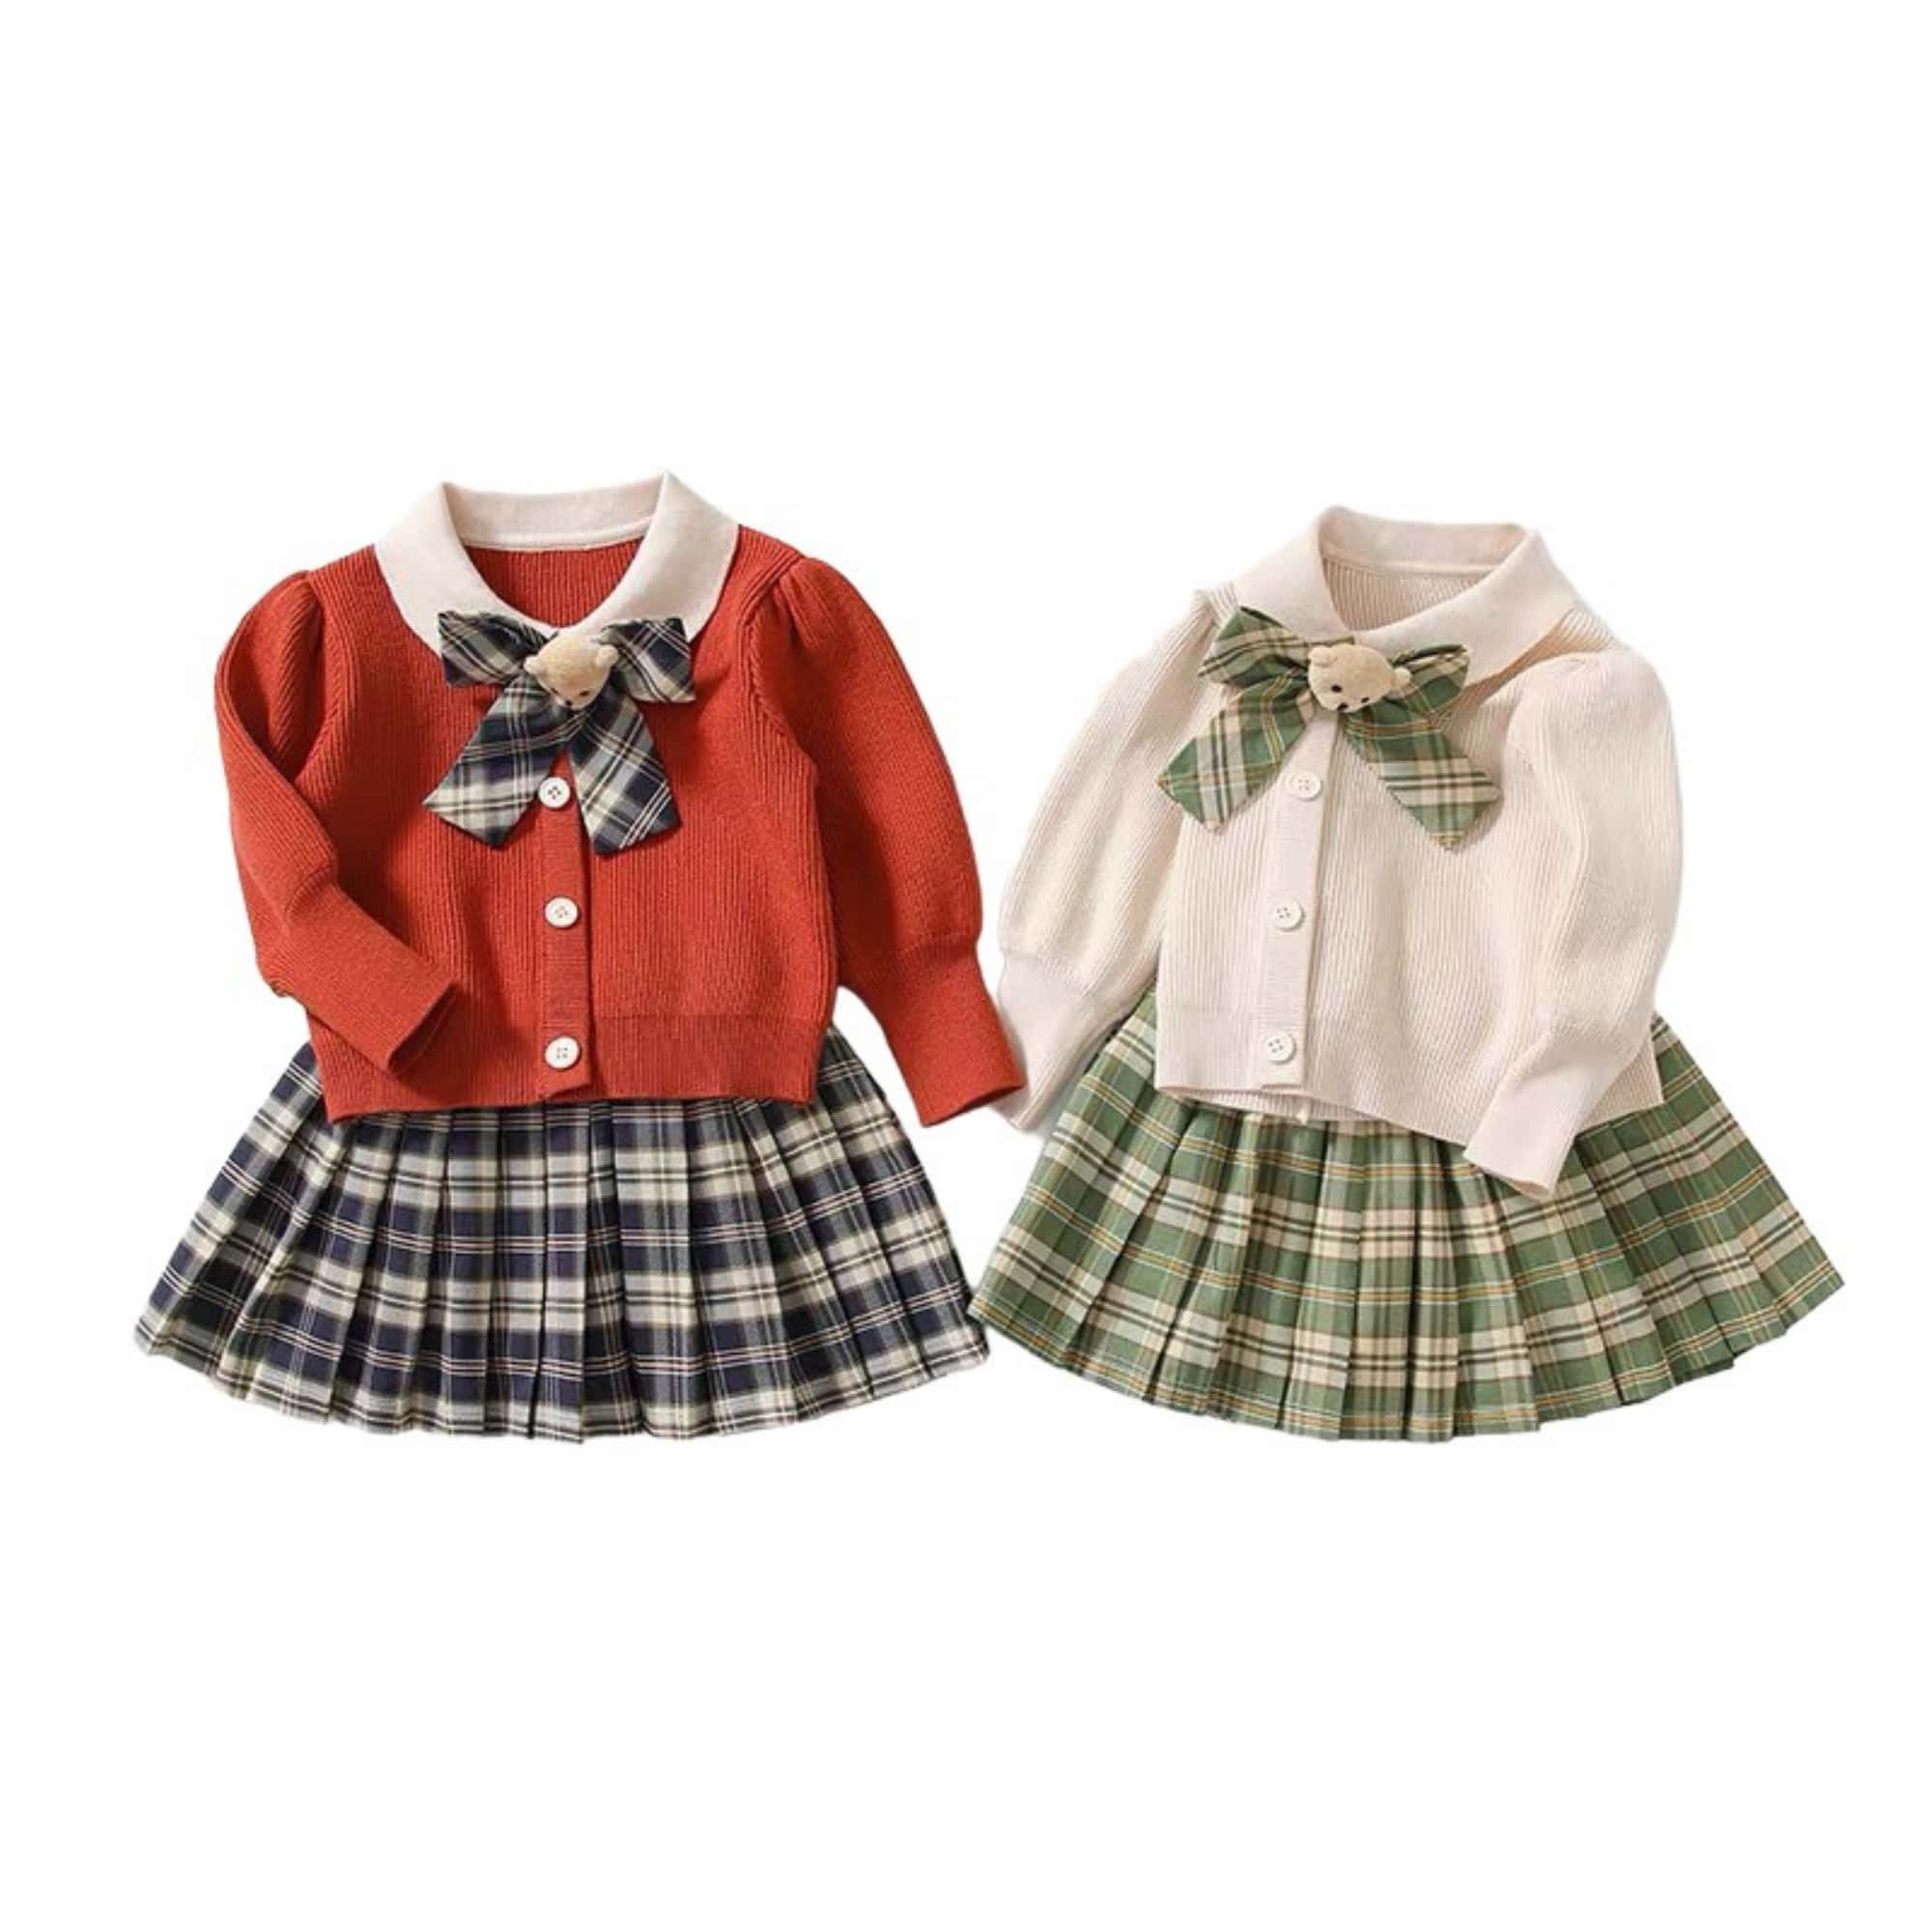 Winter Clothes For Kids High Quality 100% Wool Dresses New Fashion Each One In Opp Bag From Vietnam Manufacturer 1